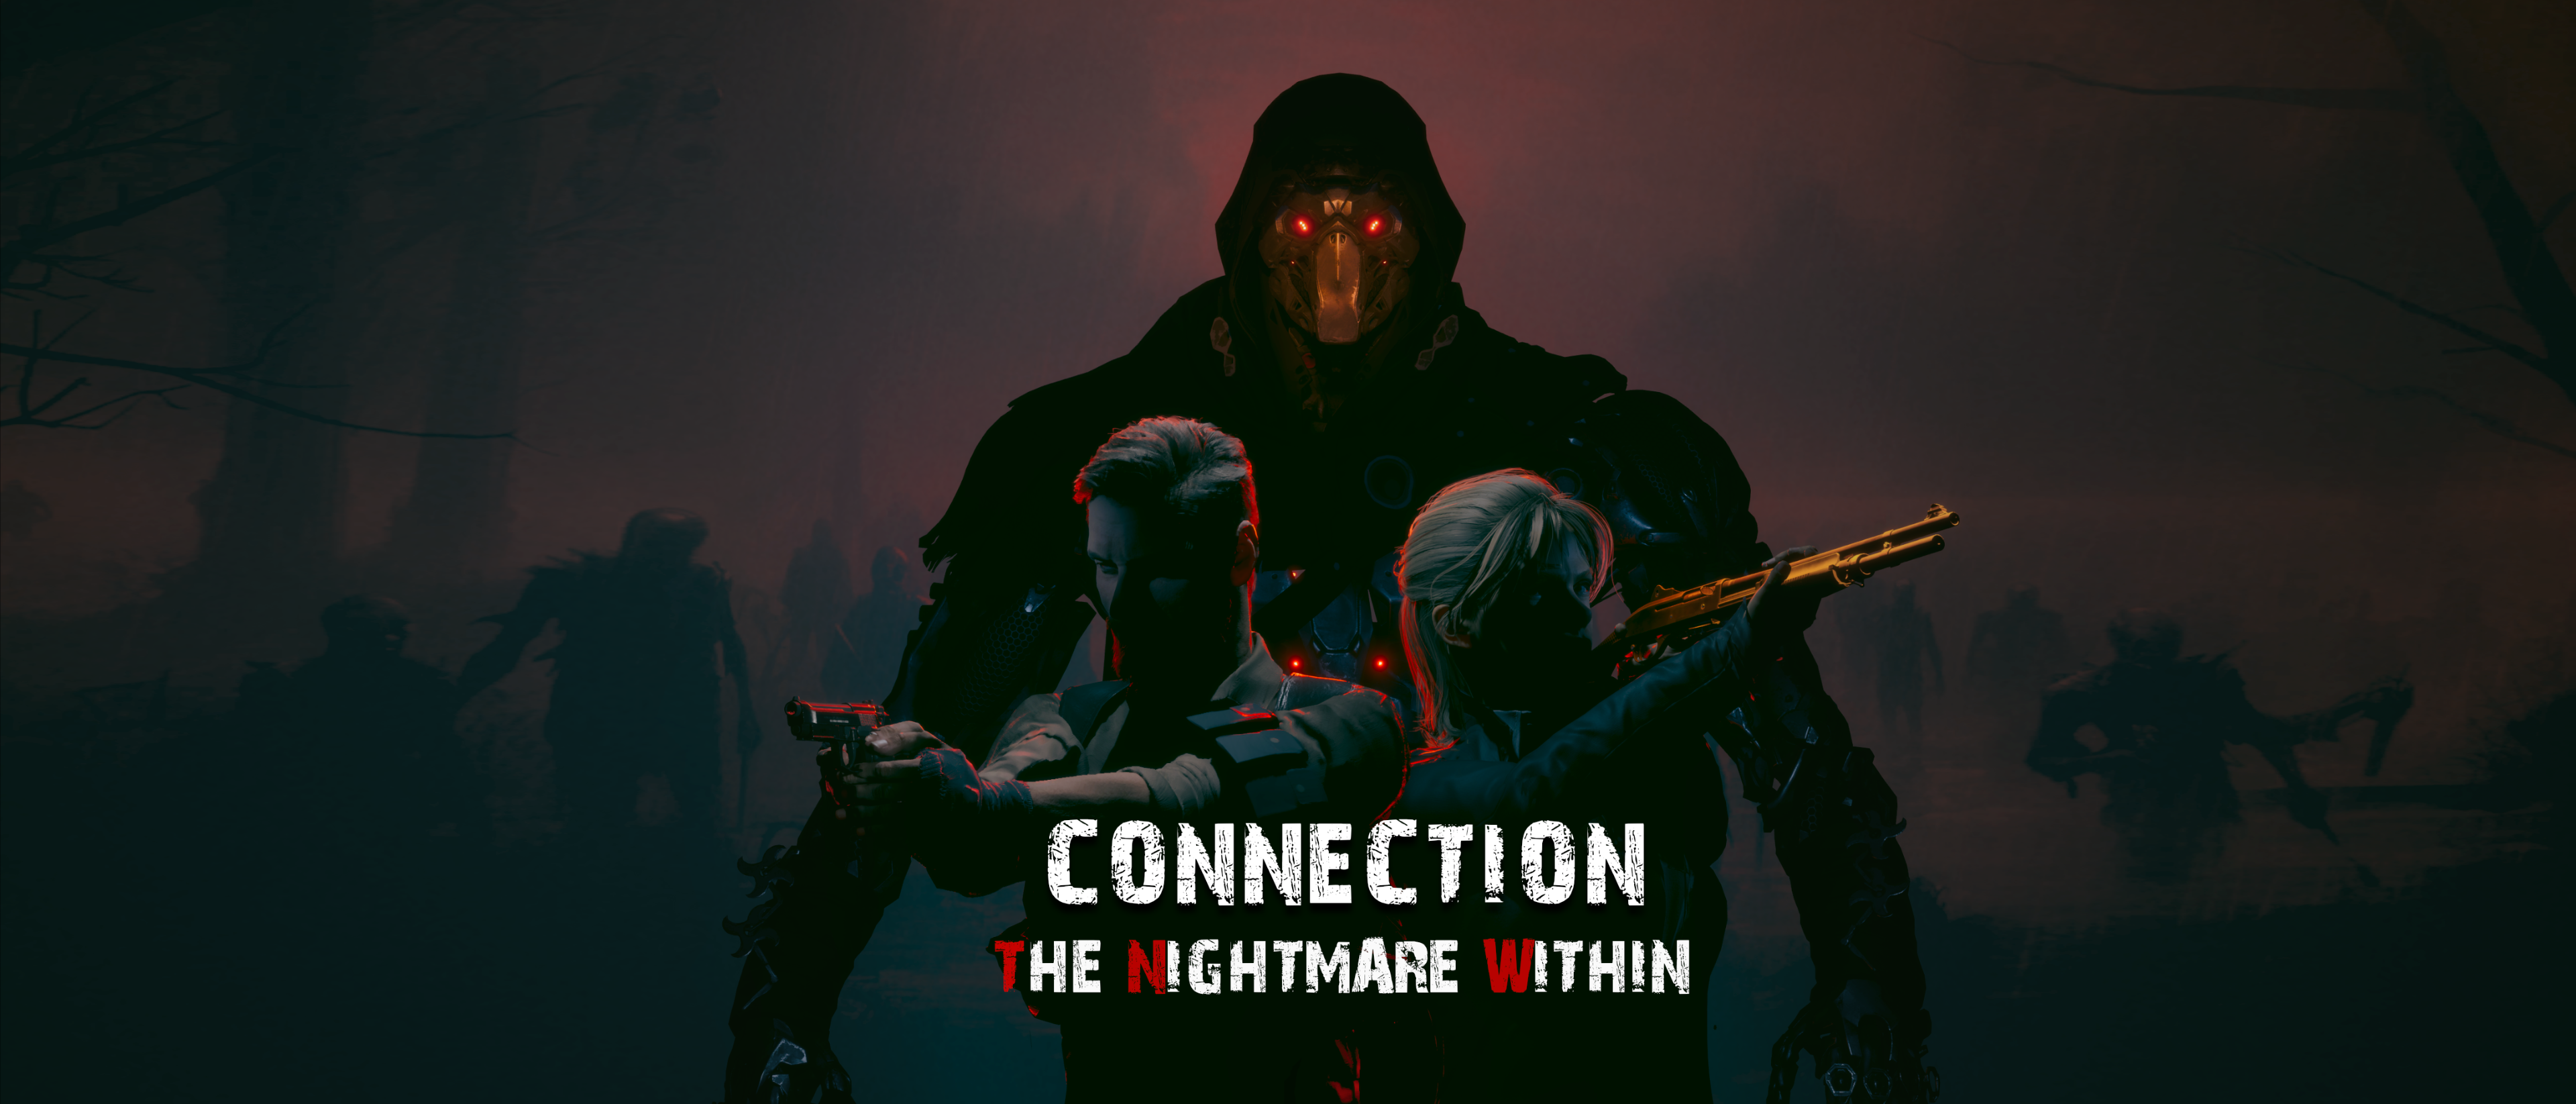 Connection: The Nightmare Within